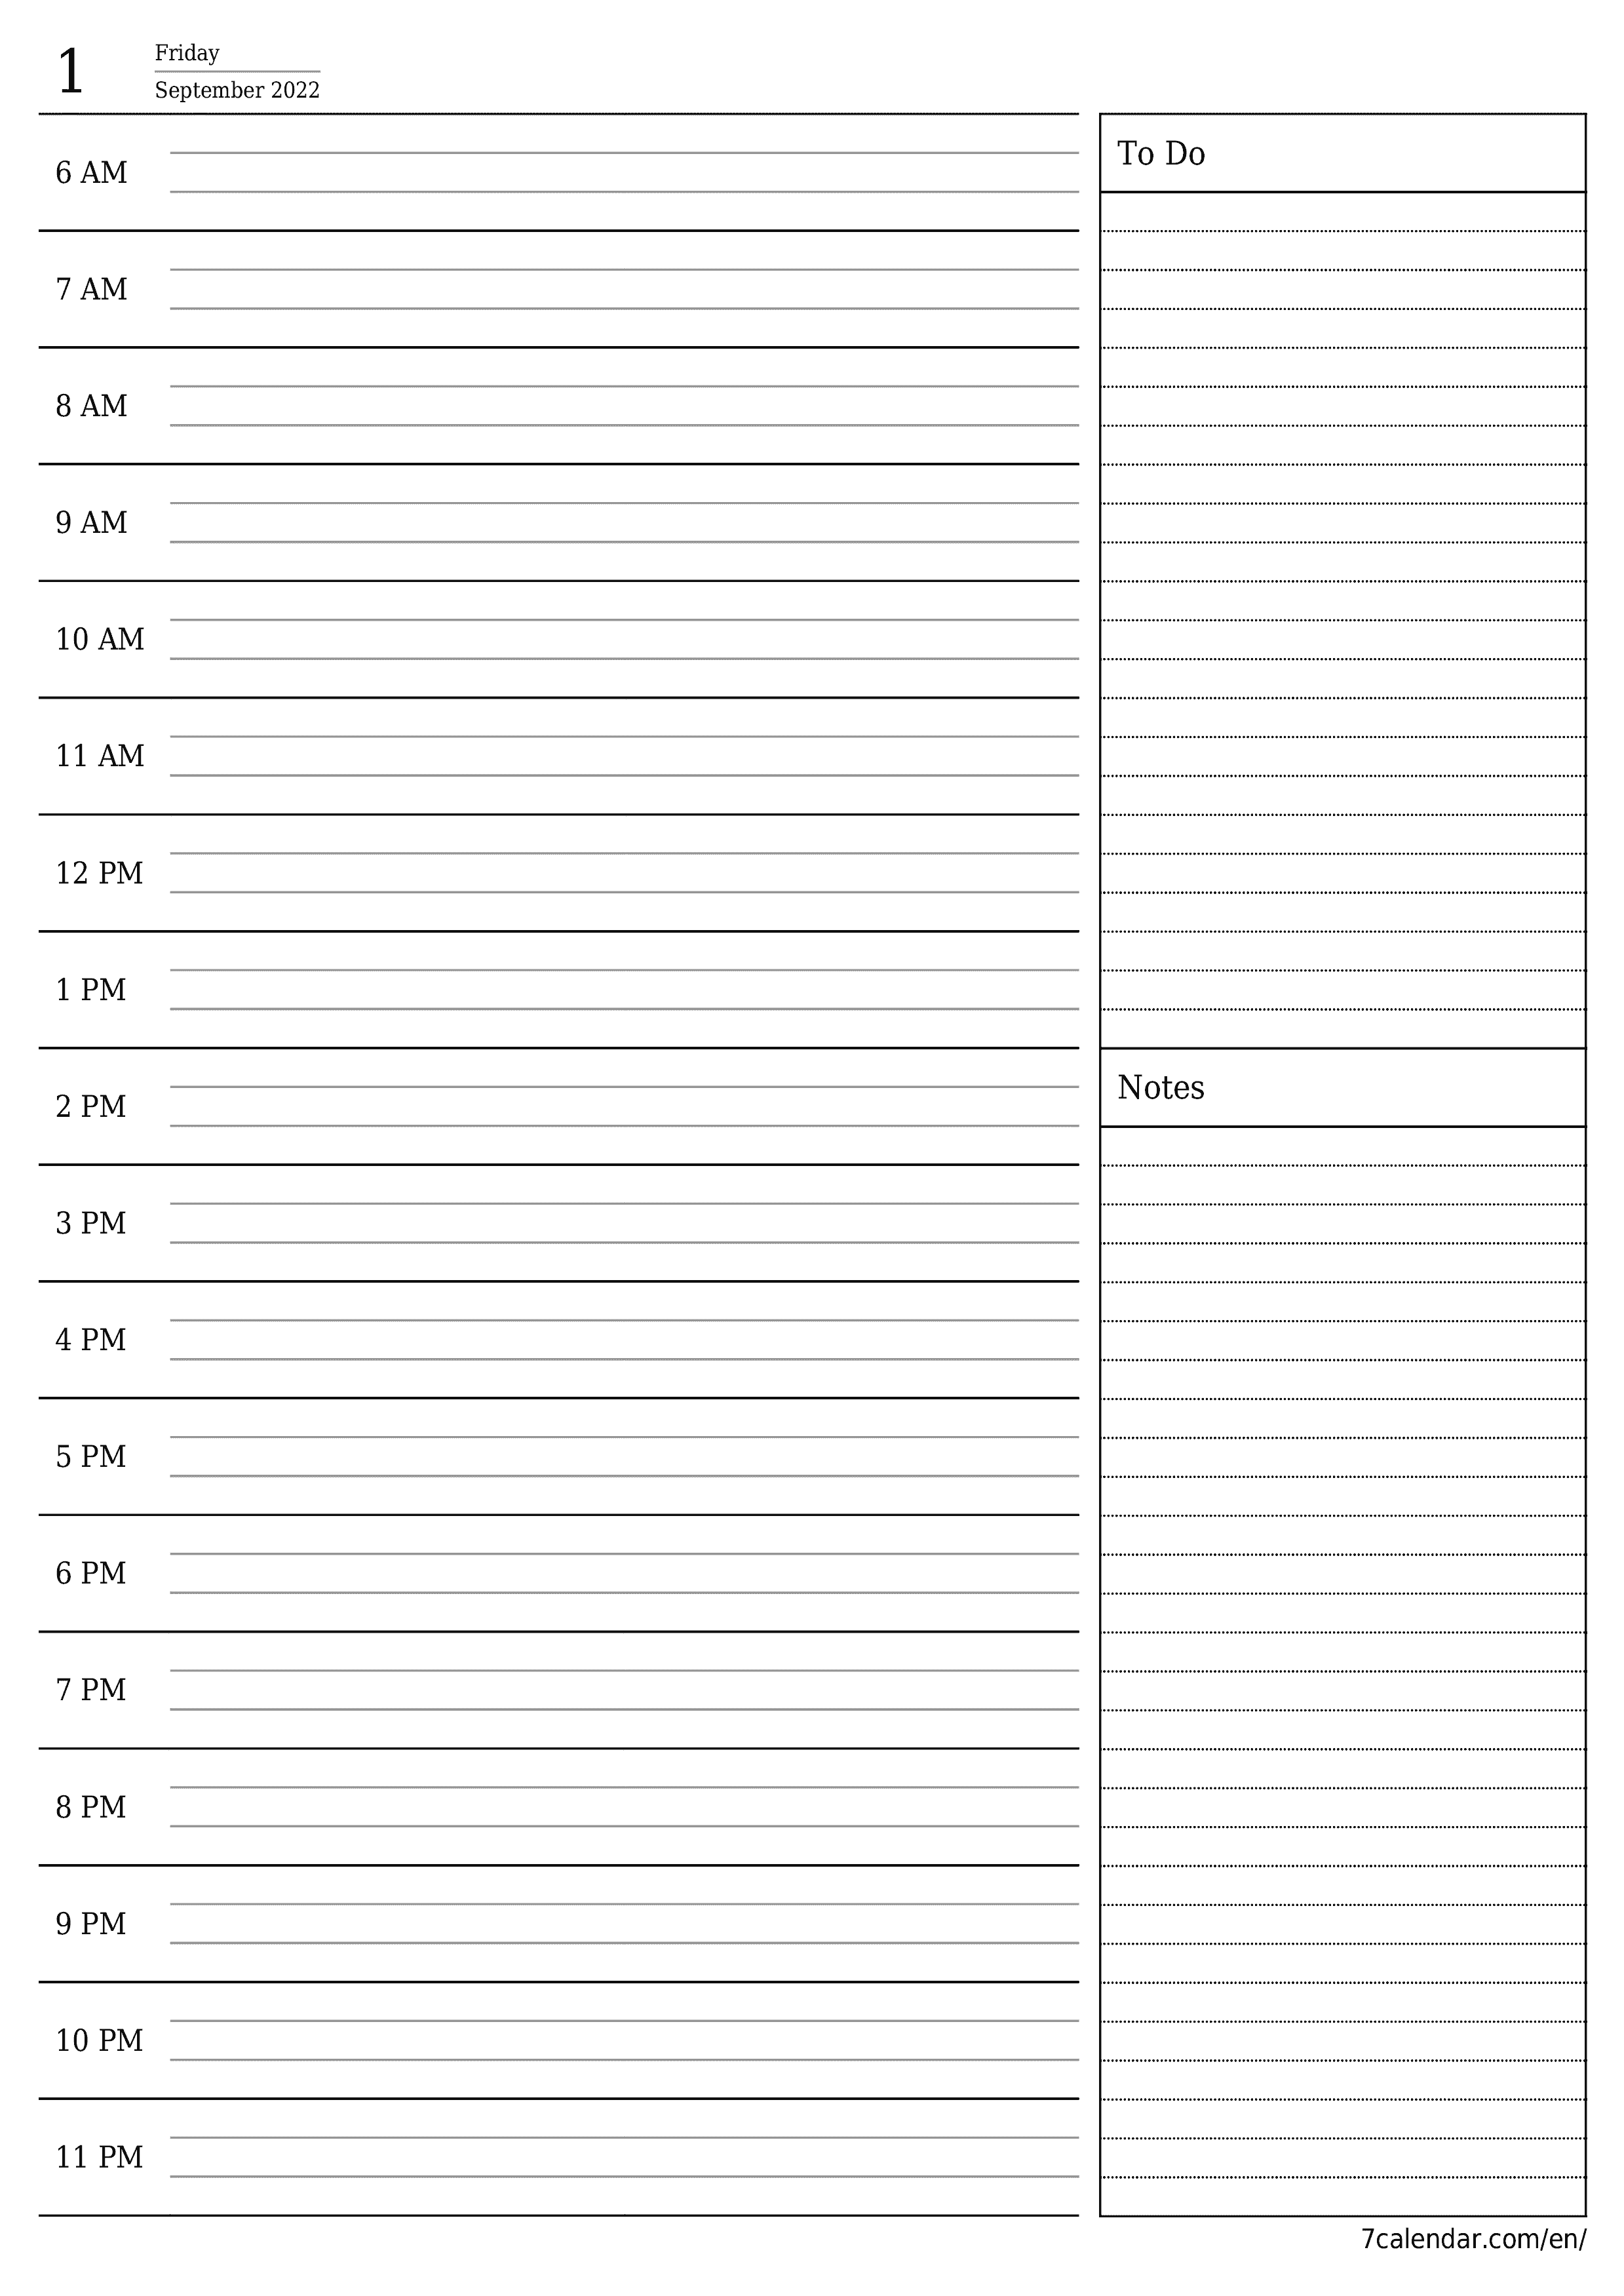 Blank daily printable calendar and planner for day September 2022 with notes, save and print to PDF PNG English